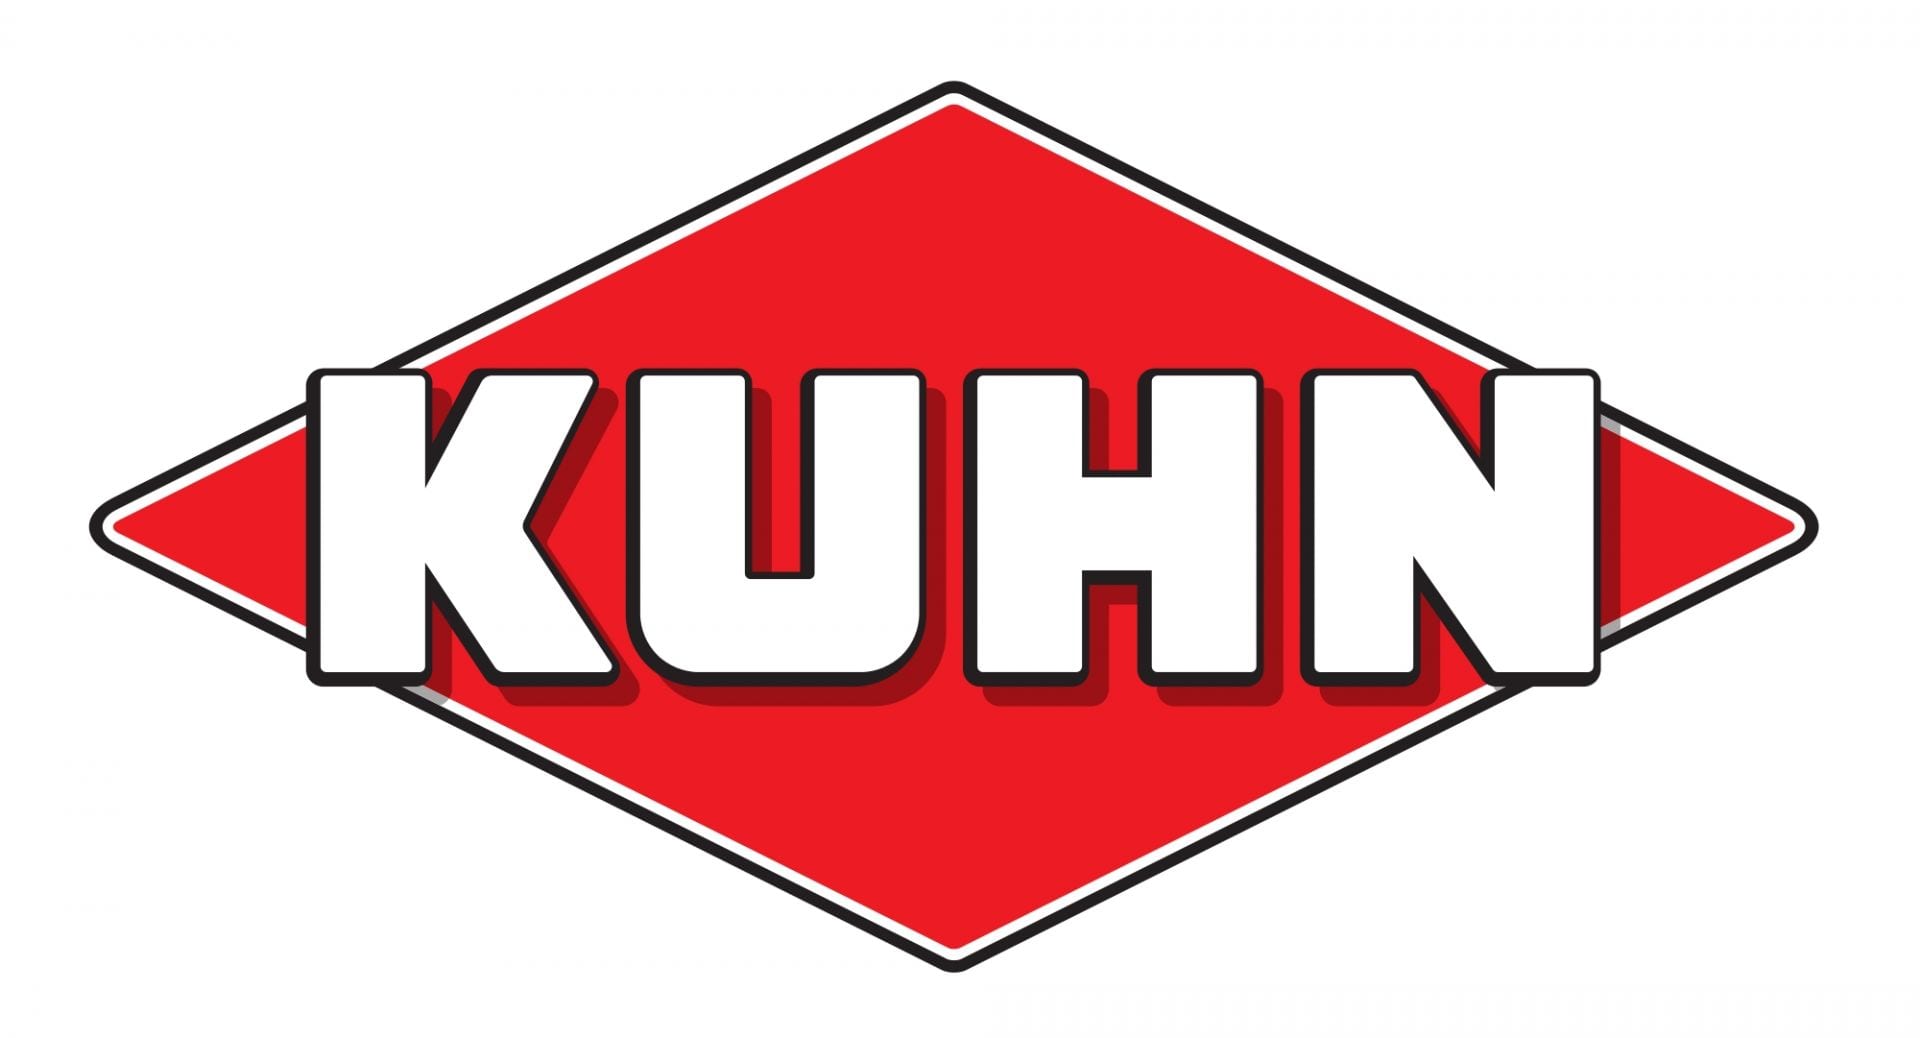 Great Prices On Kuhn End Of Season Stock C O